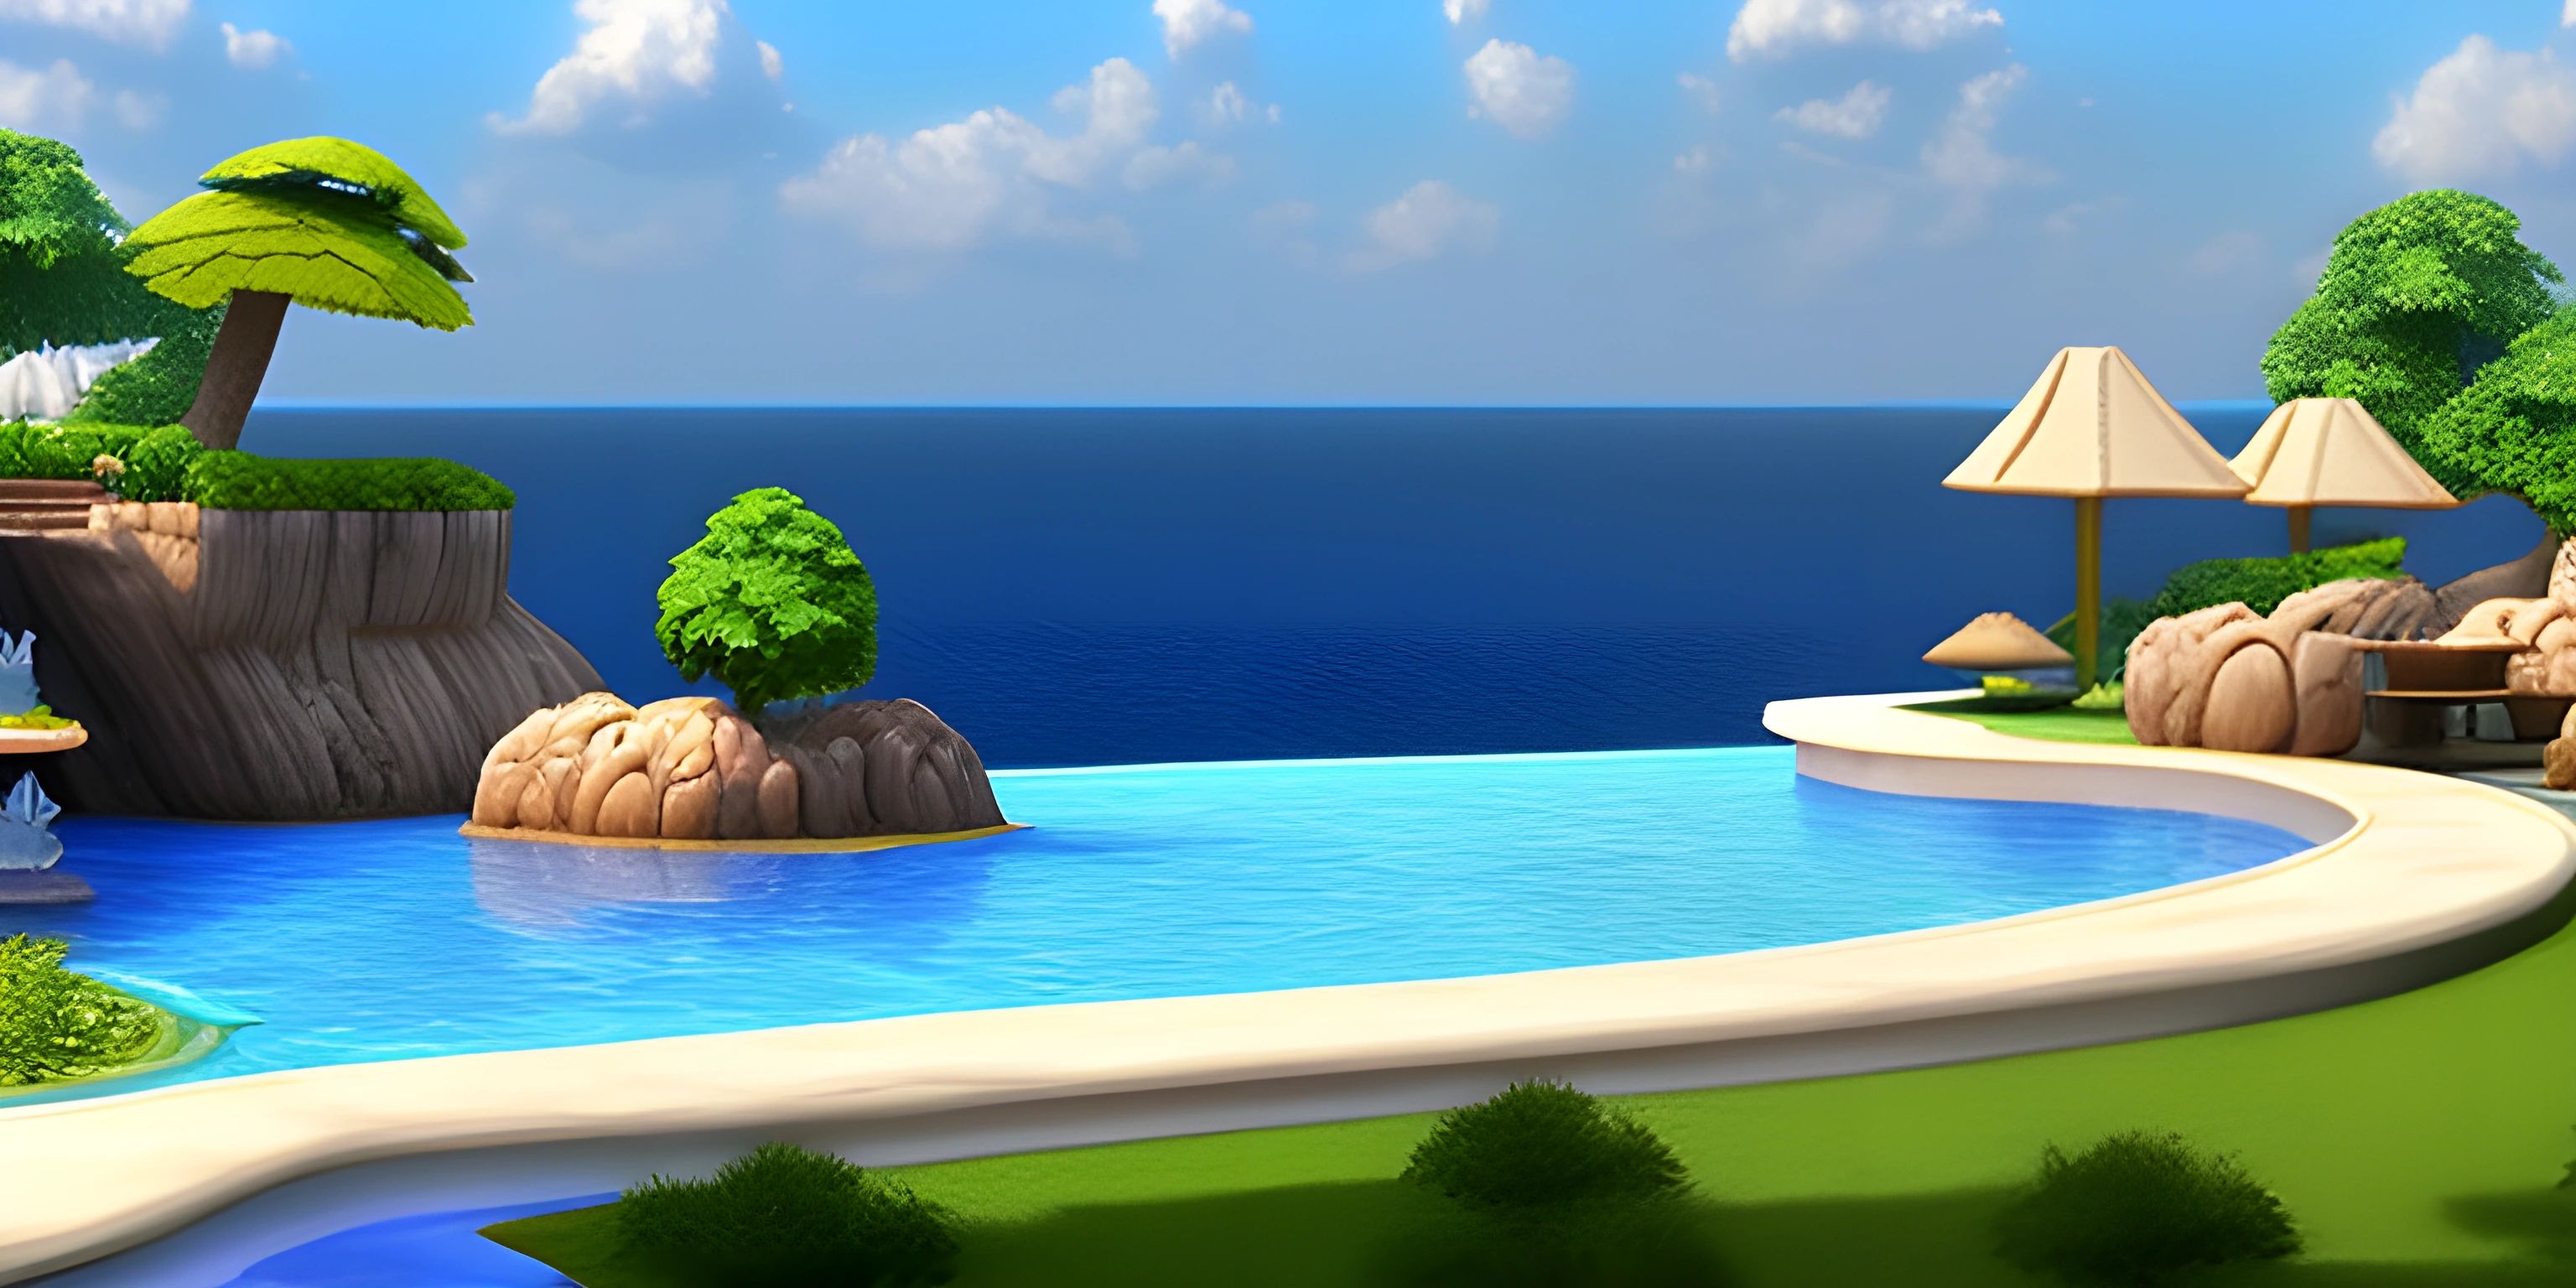 a cartoon picture of a pool in a 3d game environment that contains an umbrella and gazebo